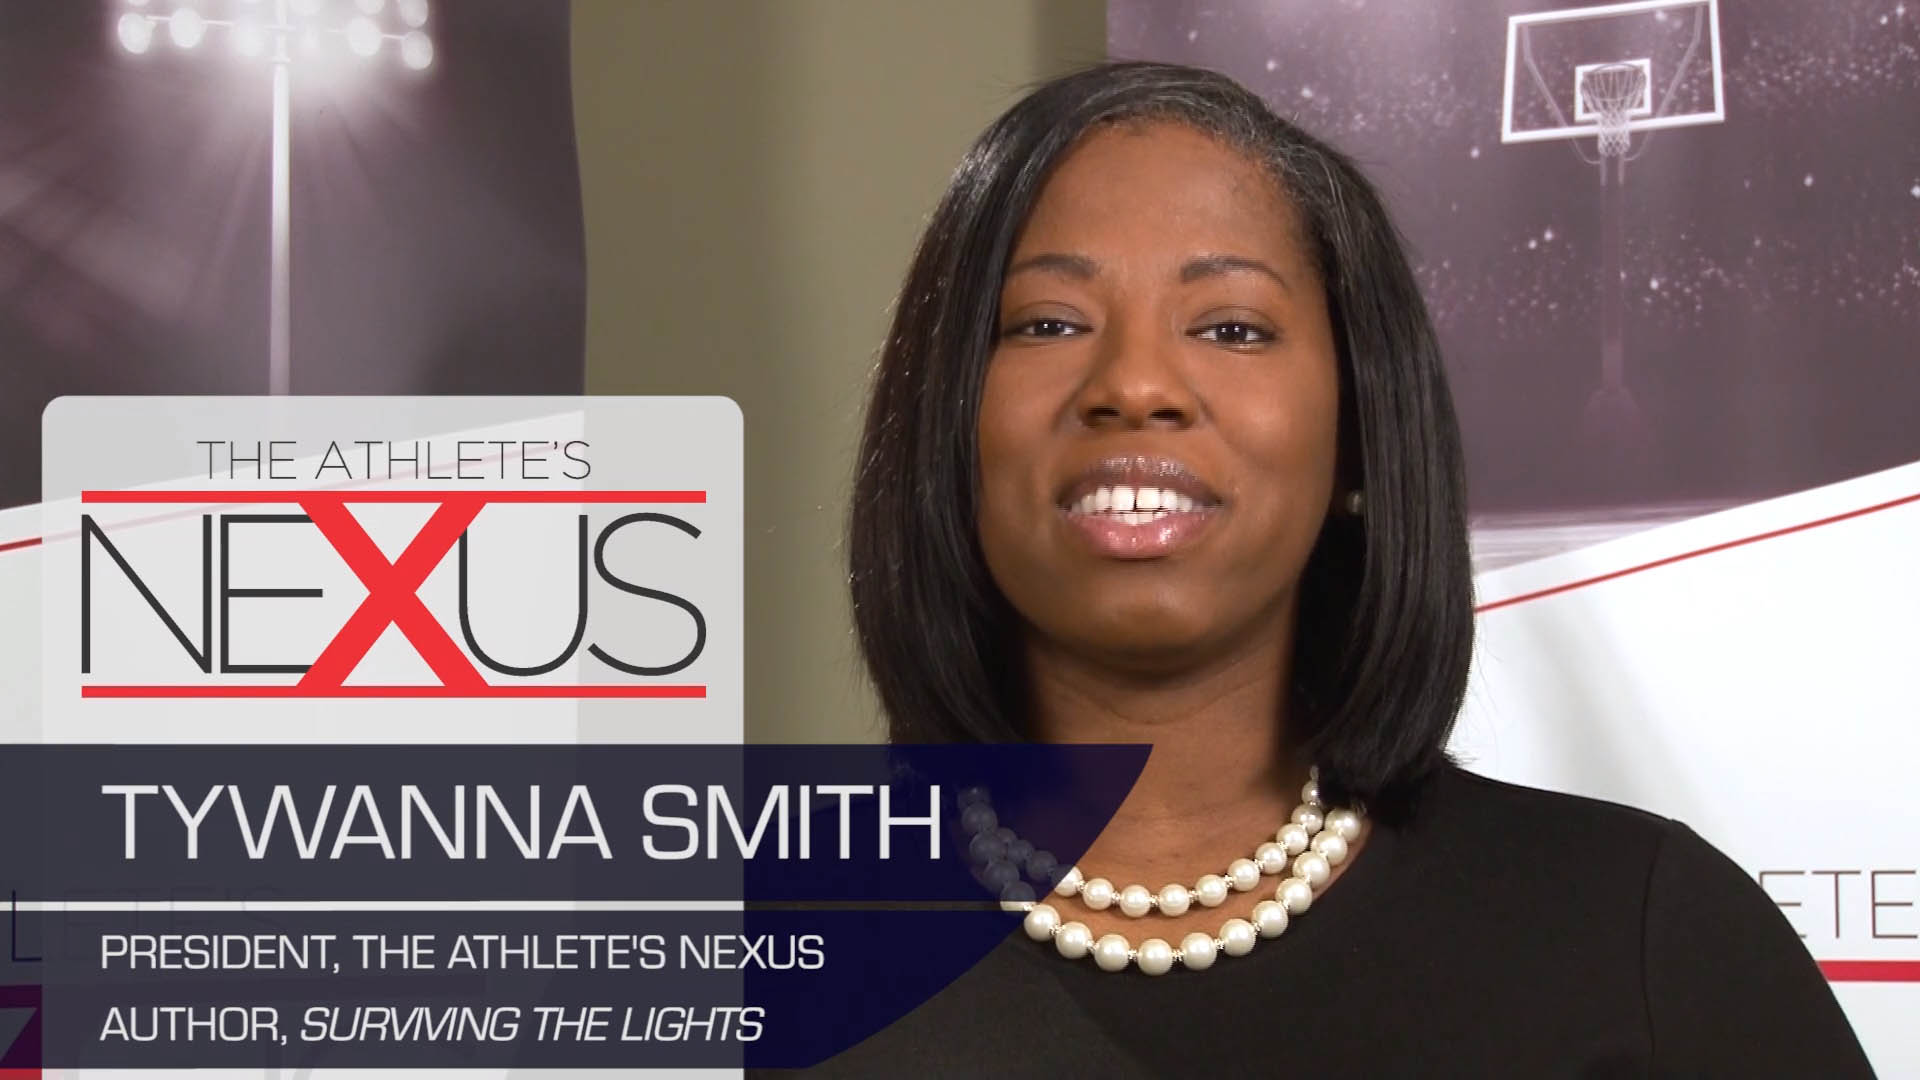 The Athlete's Nexus  |  Marketing video for a consulting business